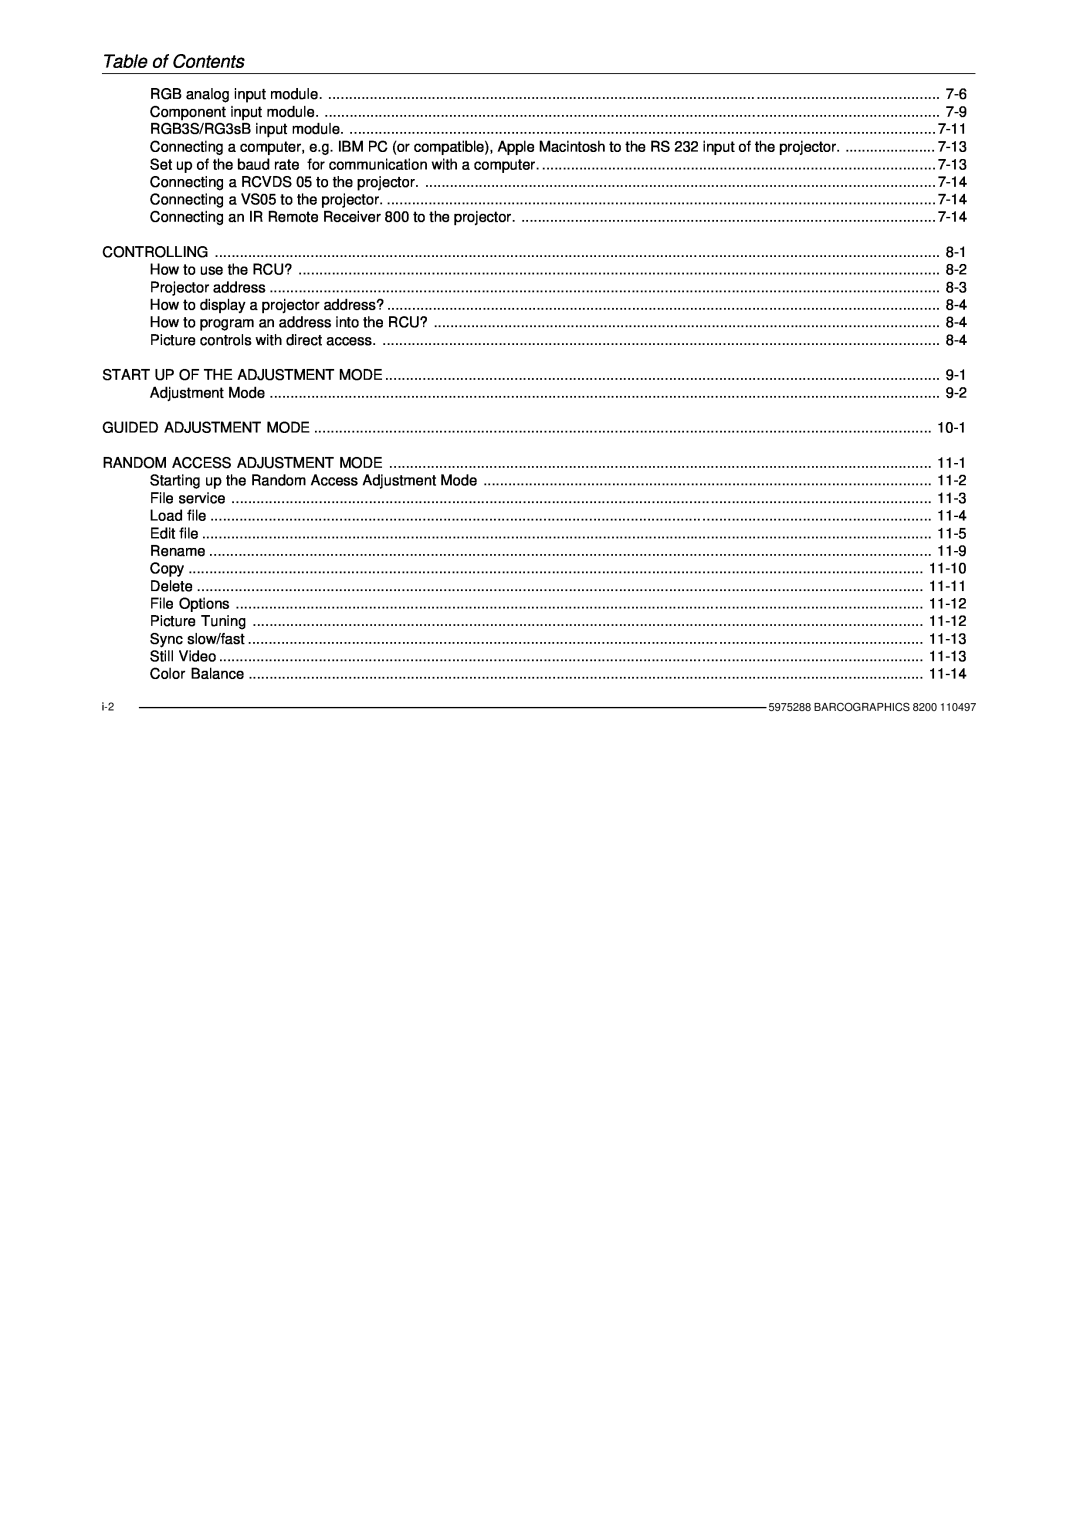 Barco R9001330 owner manual Table of Contents, Set up of the baud rate for communication with a computer 